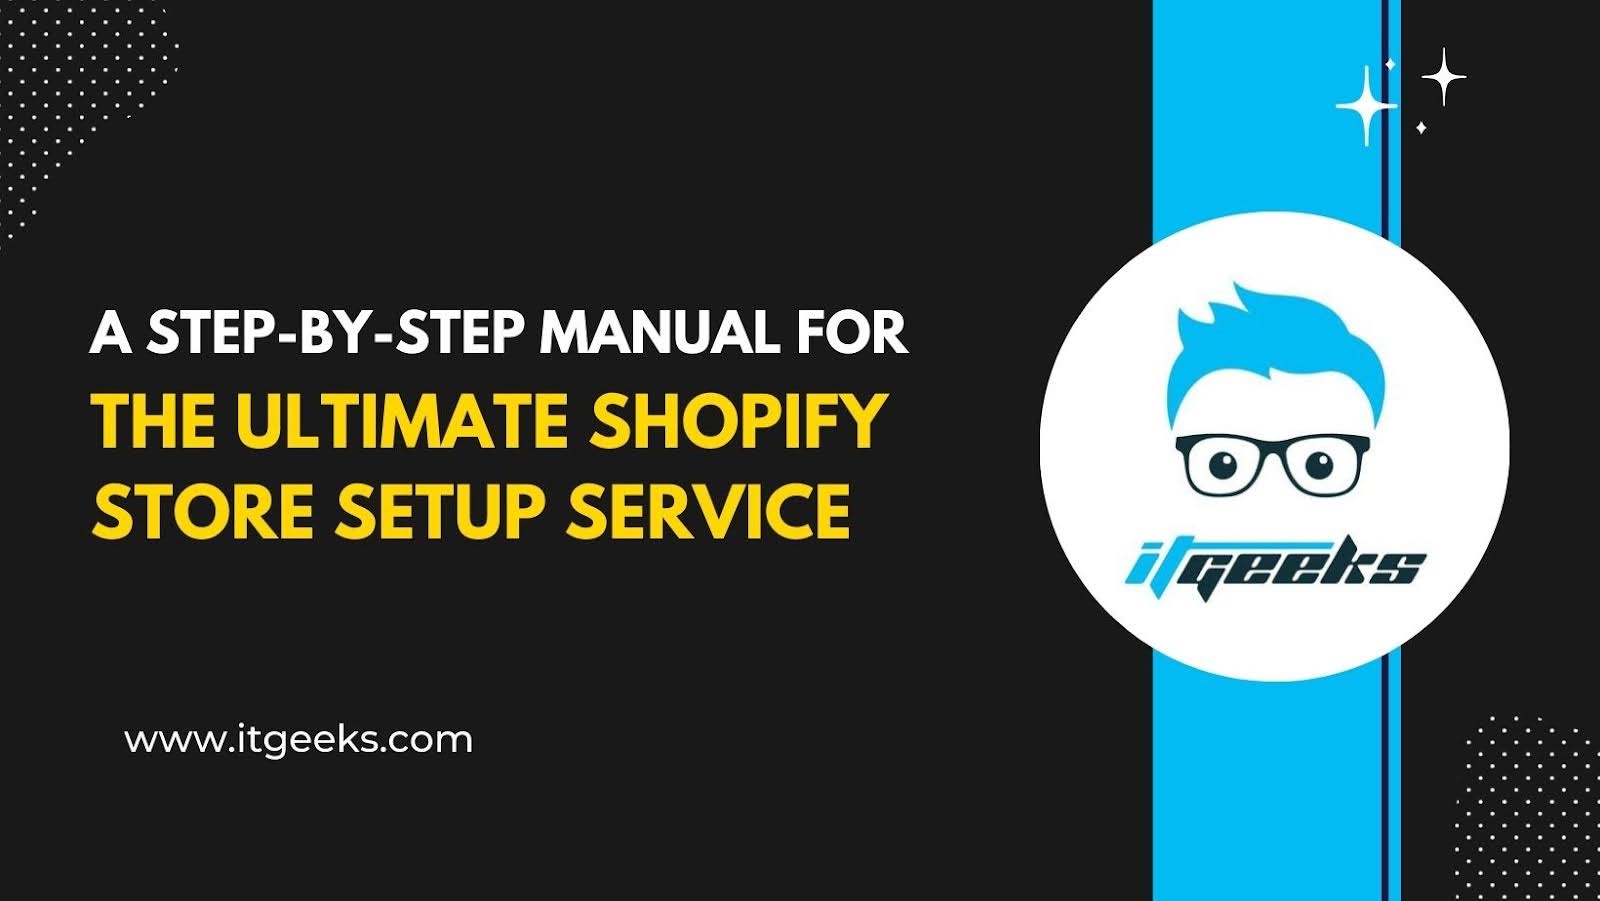 A Step-by-Step Manual for the Ultimate shopify store setup service.